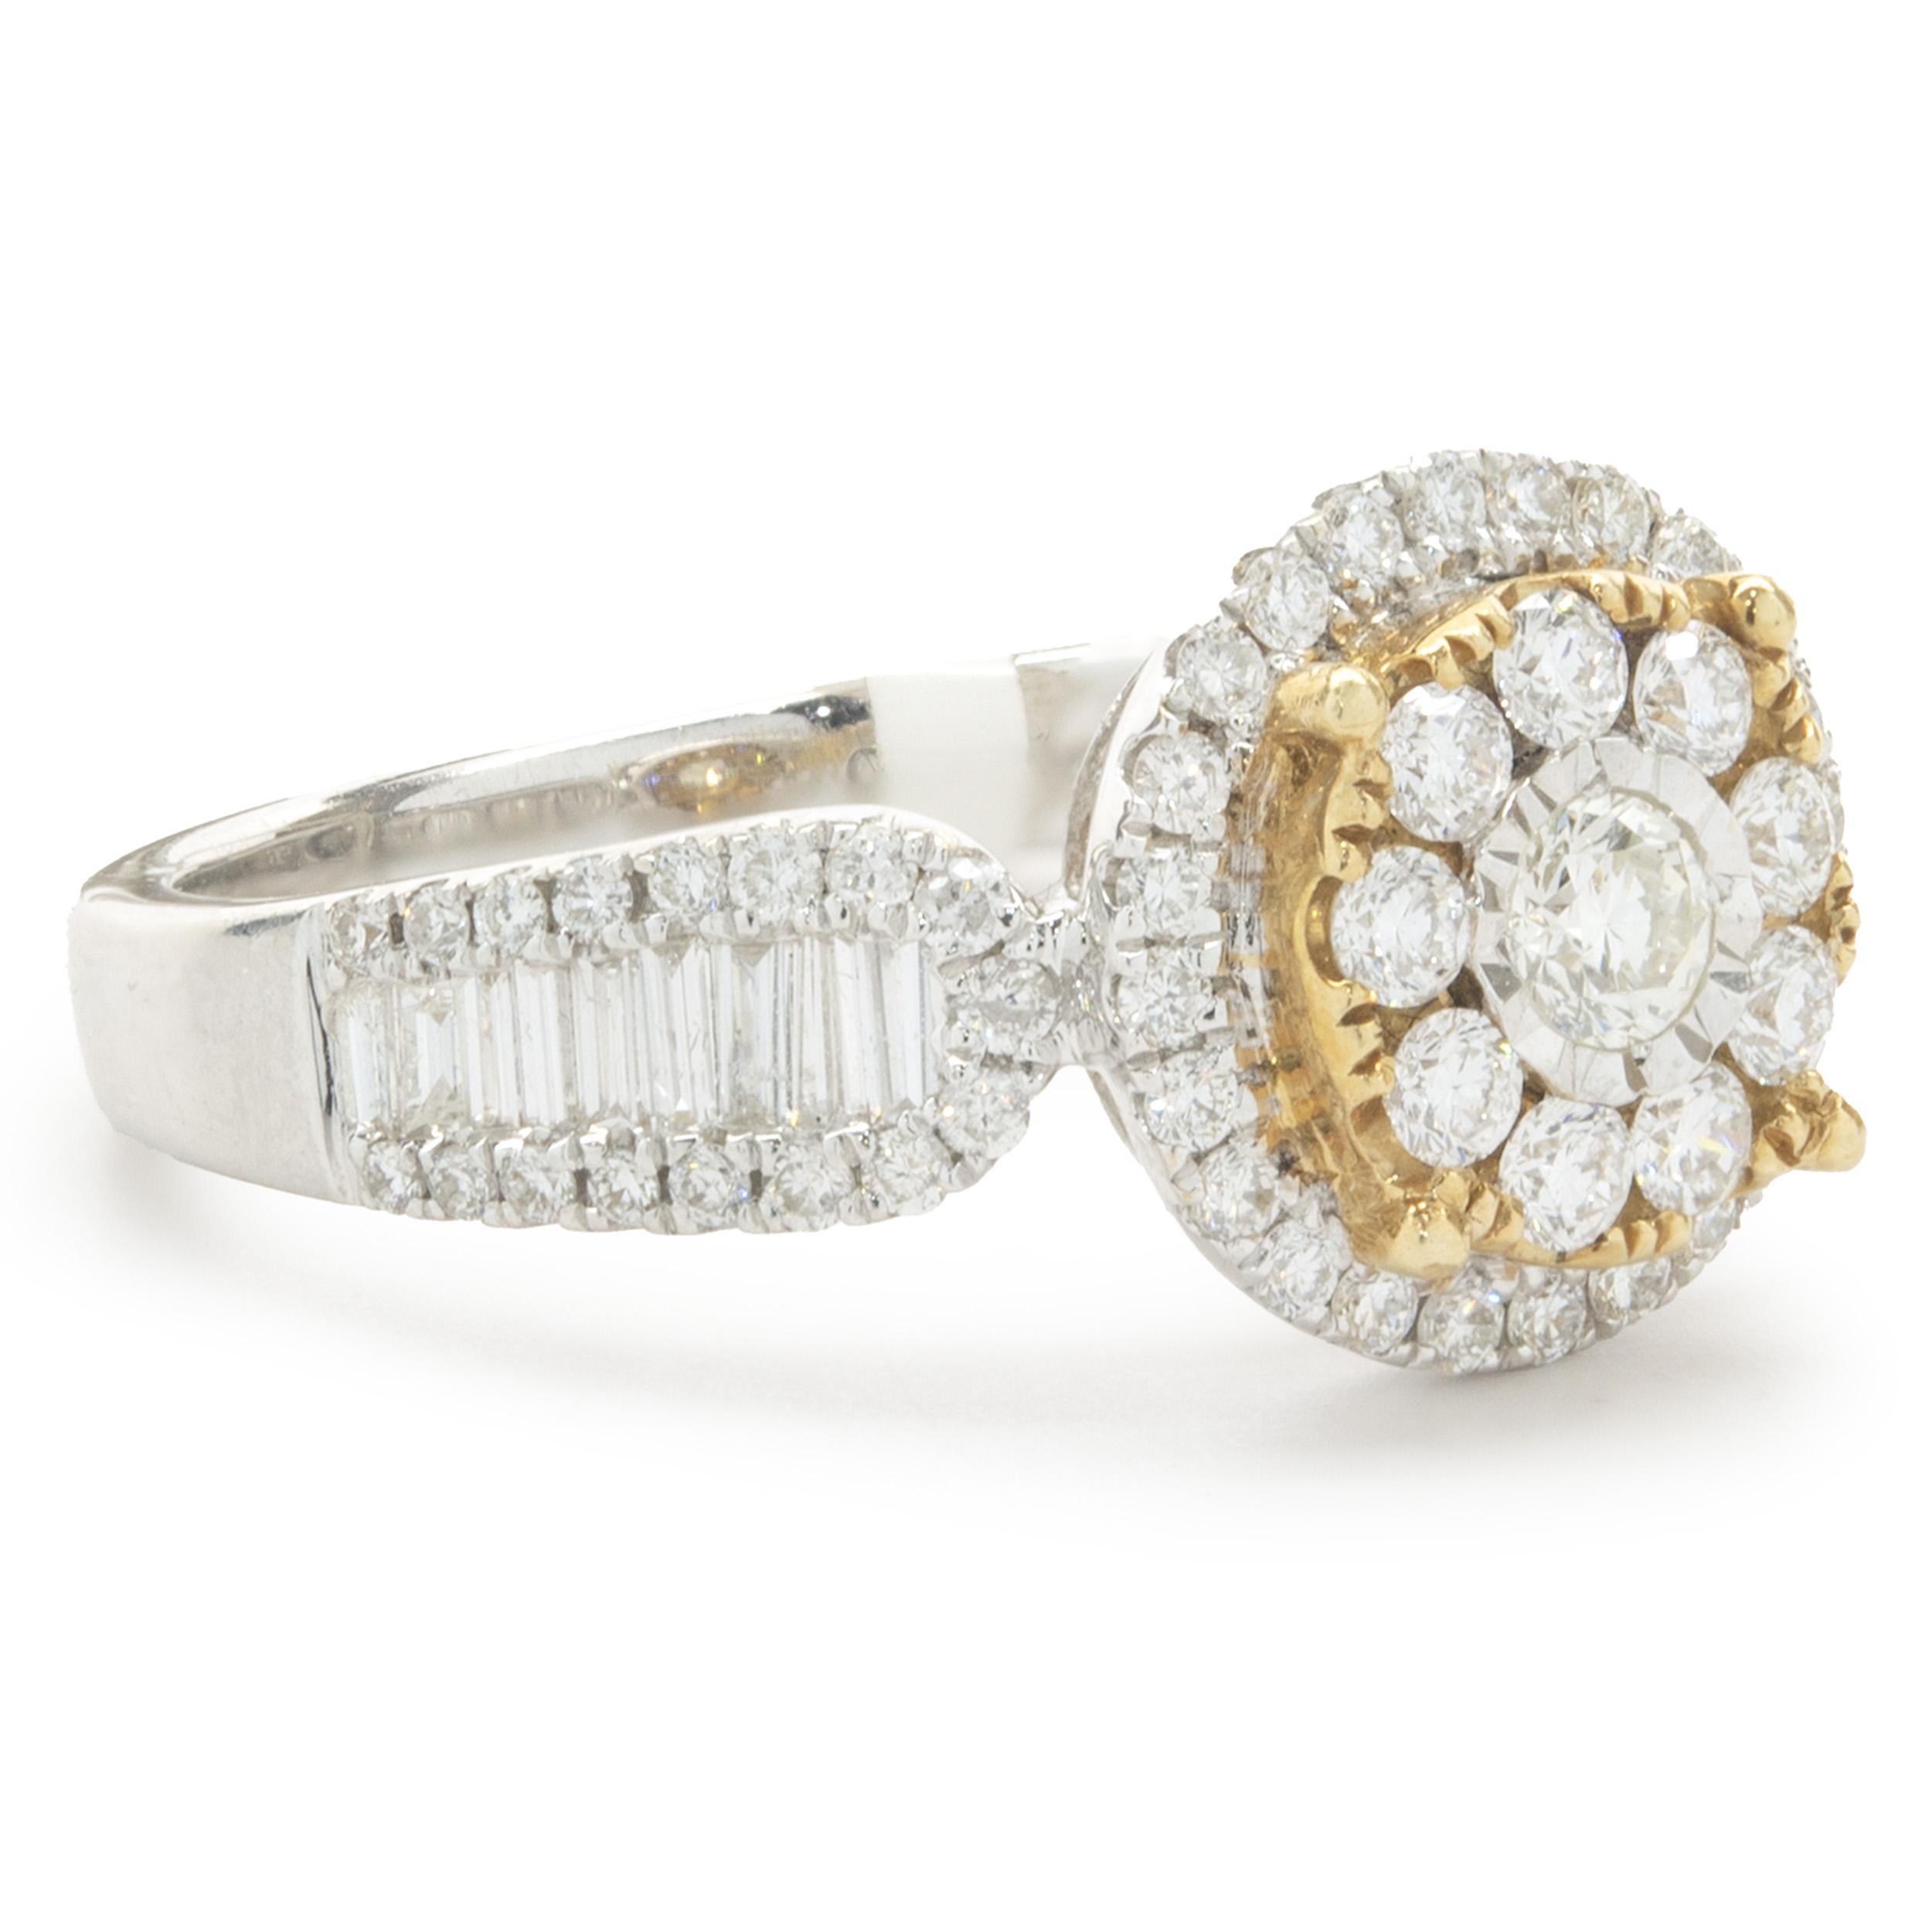 Designer: custom
Material: 18K White and Yellow Gold
Diamond: 86 round and baguette diamonds= 0.99cttw
Color: H
Clarity: SI1
Ring size: 6.75 (please allow two additional shipping days for sizing requests)
Weight: 5.05 grams
